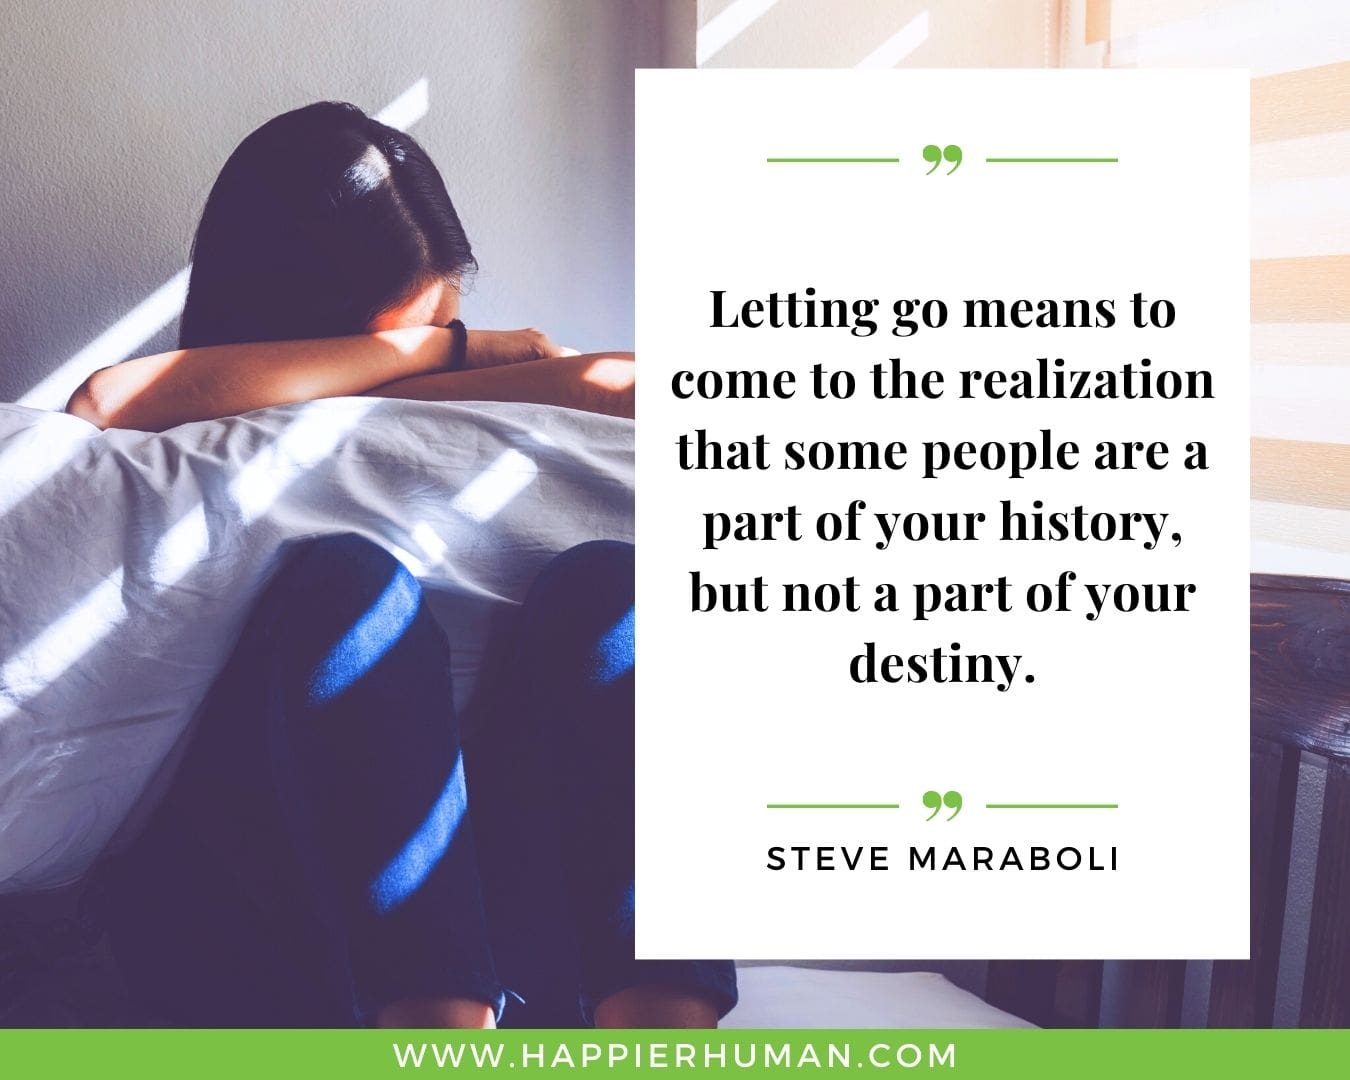 Toxic People Quotes - “Letting go means to come to the realization that some people are a part of your history, but not a part of your destiny.” – Steve Maraboli